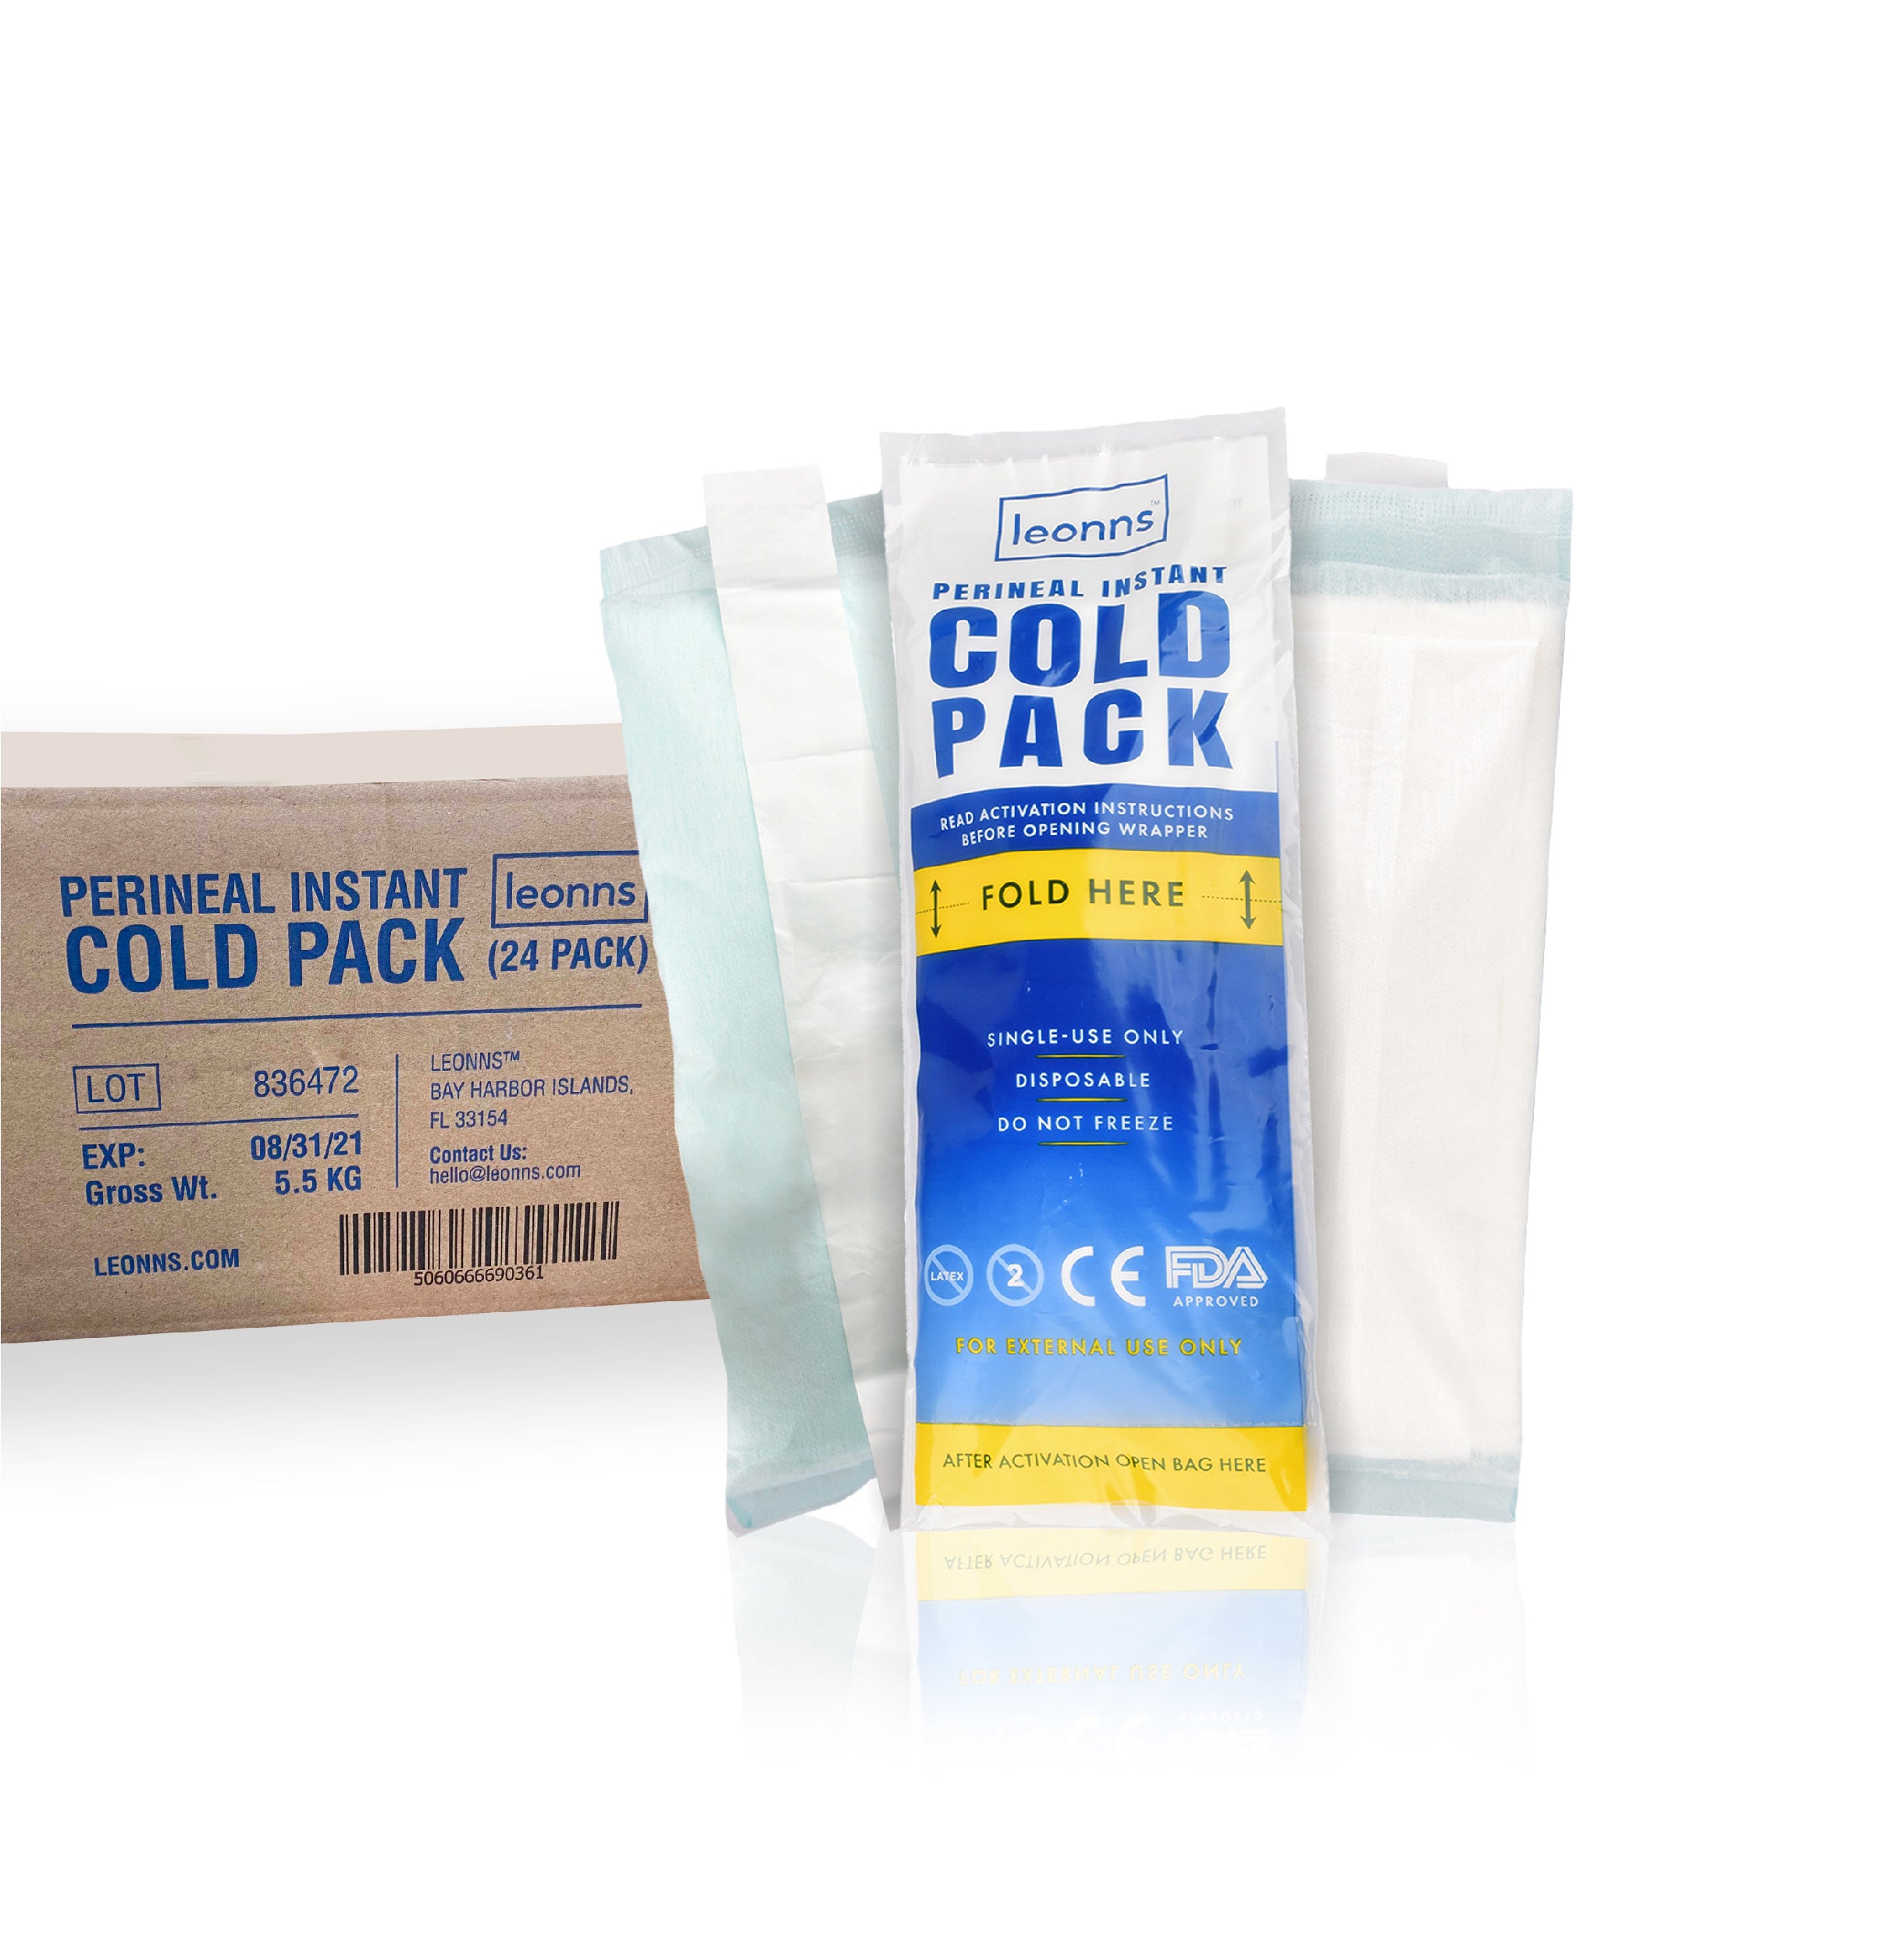 Medline 24 Pack Perineal Cold Packs with Adhesive Strip, 4.7 x